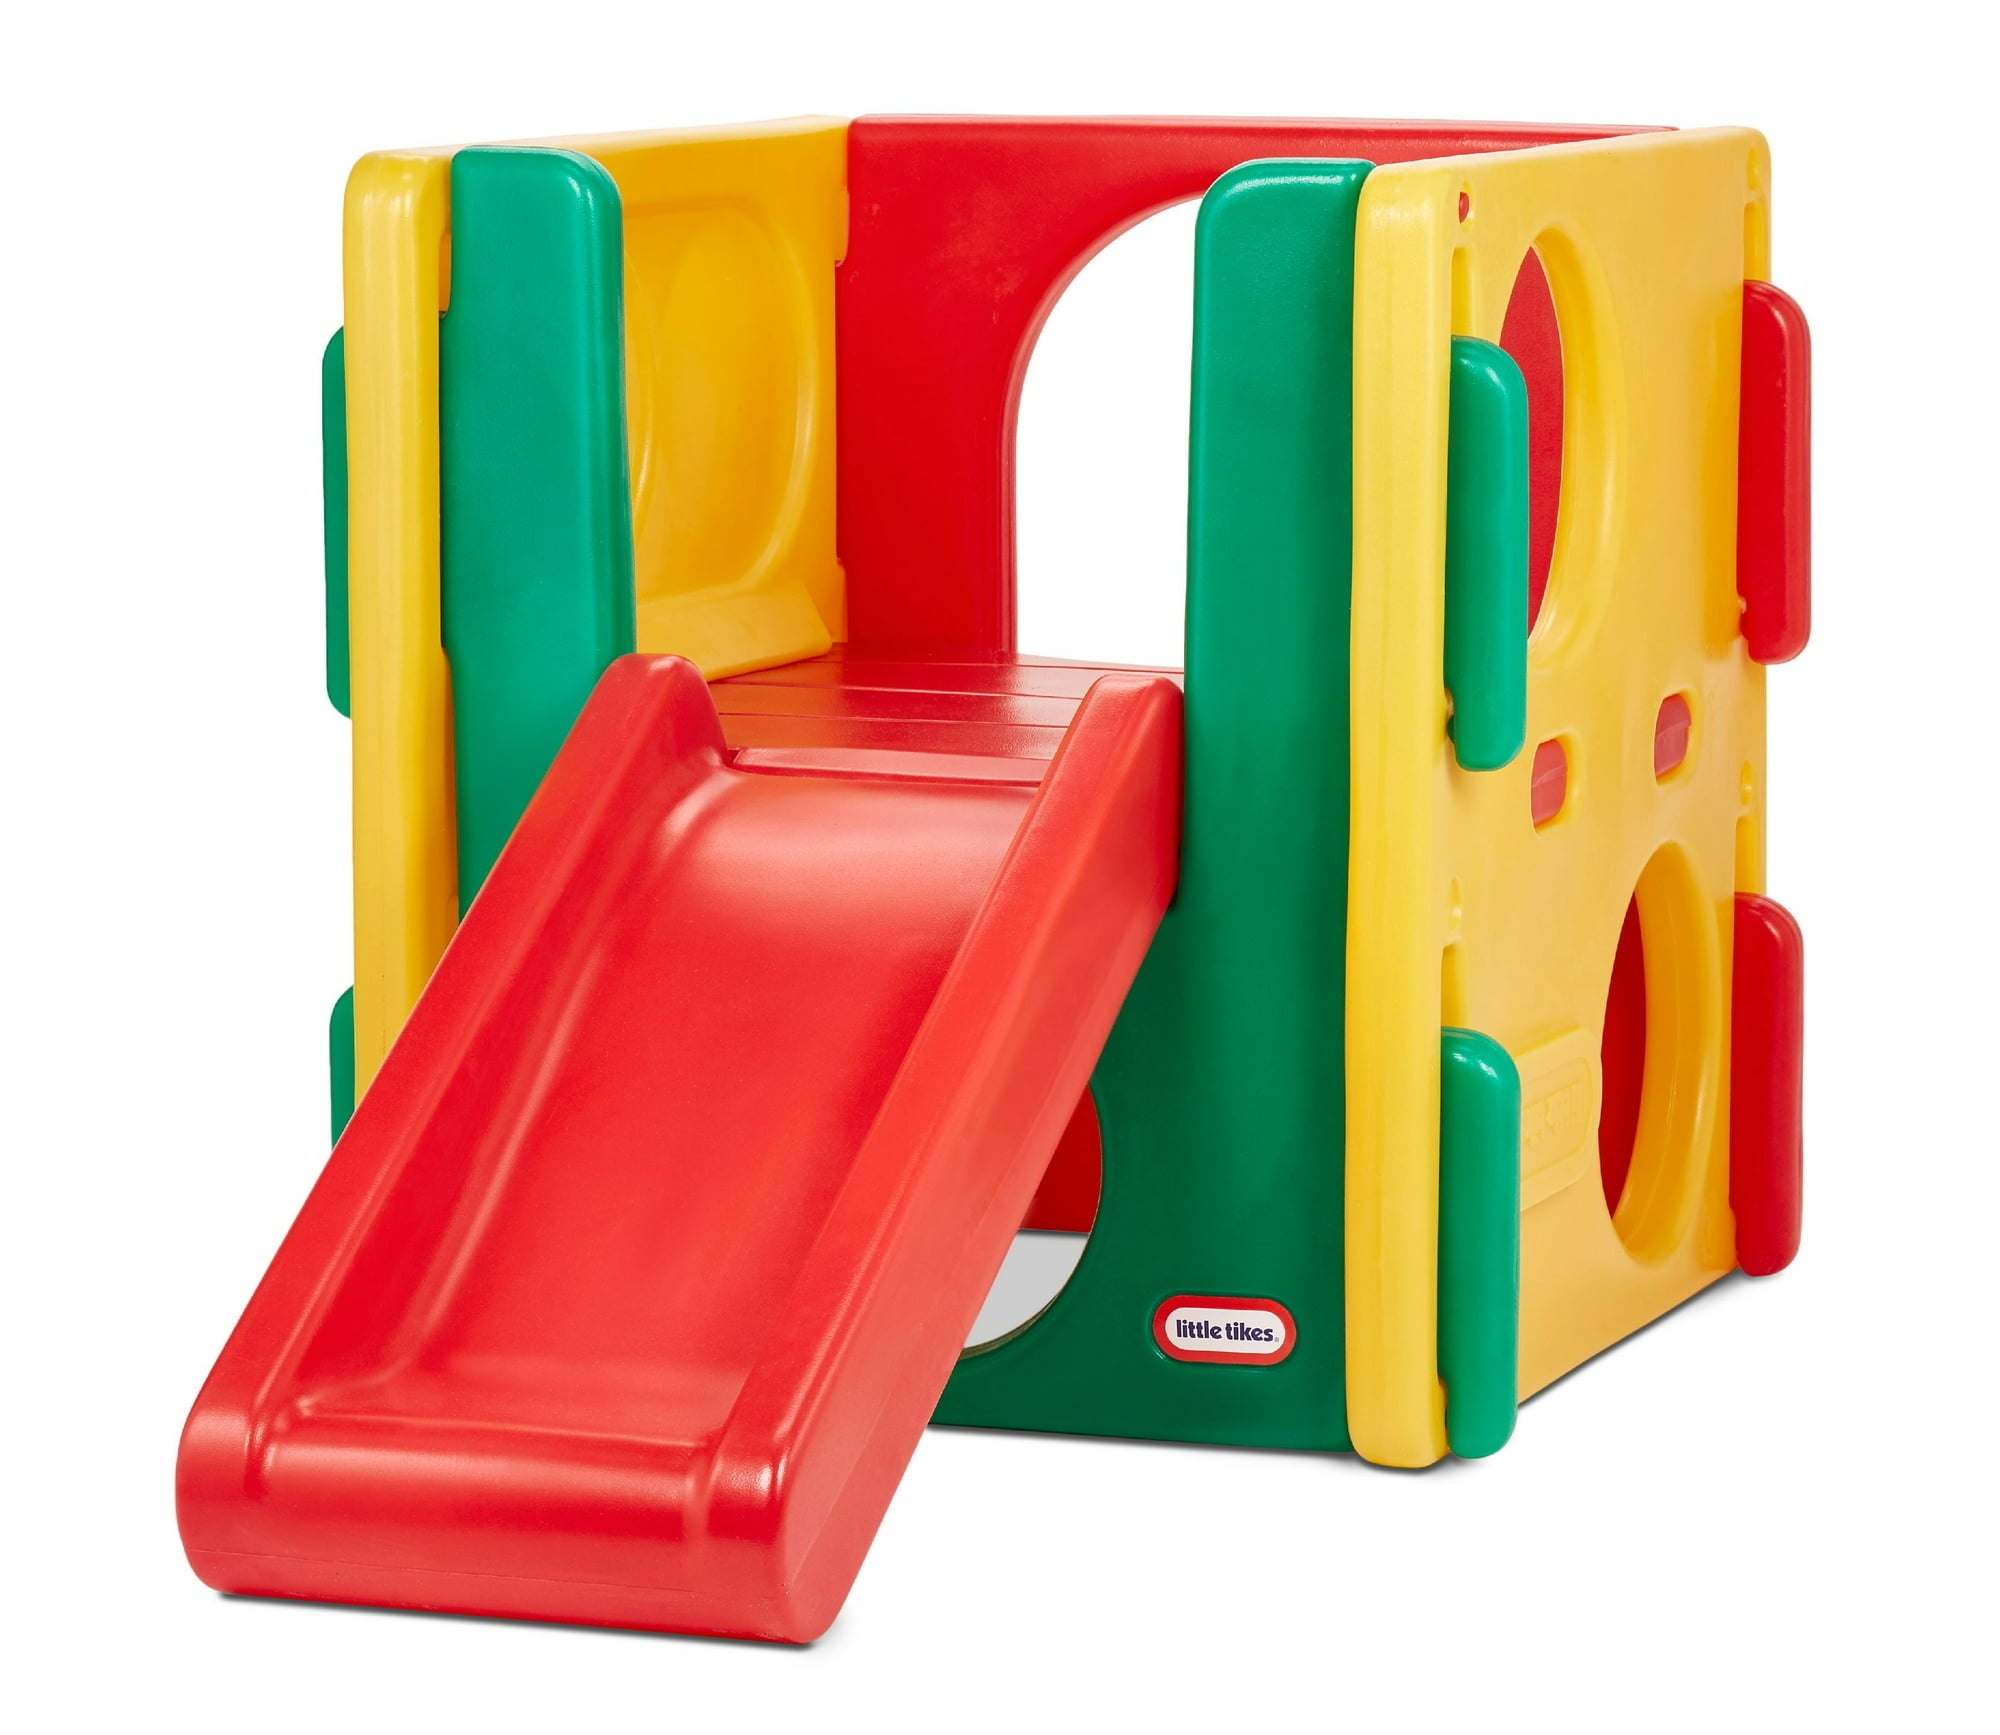 a multicolored plastic box with a slide and holes for children to climb and play